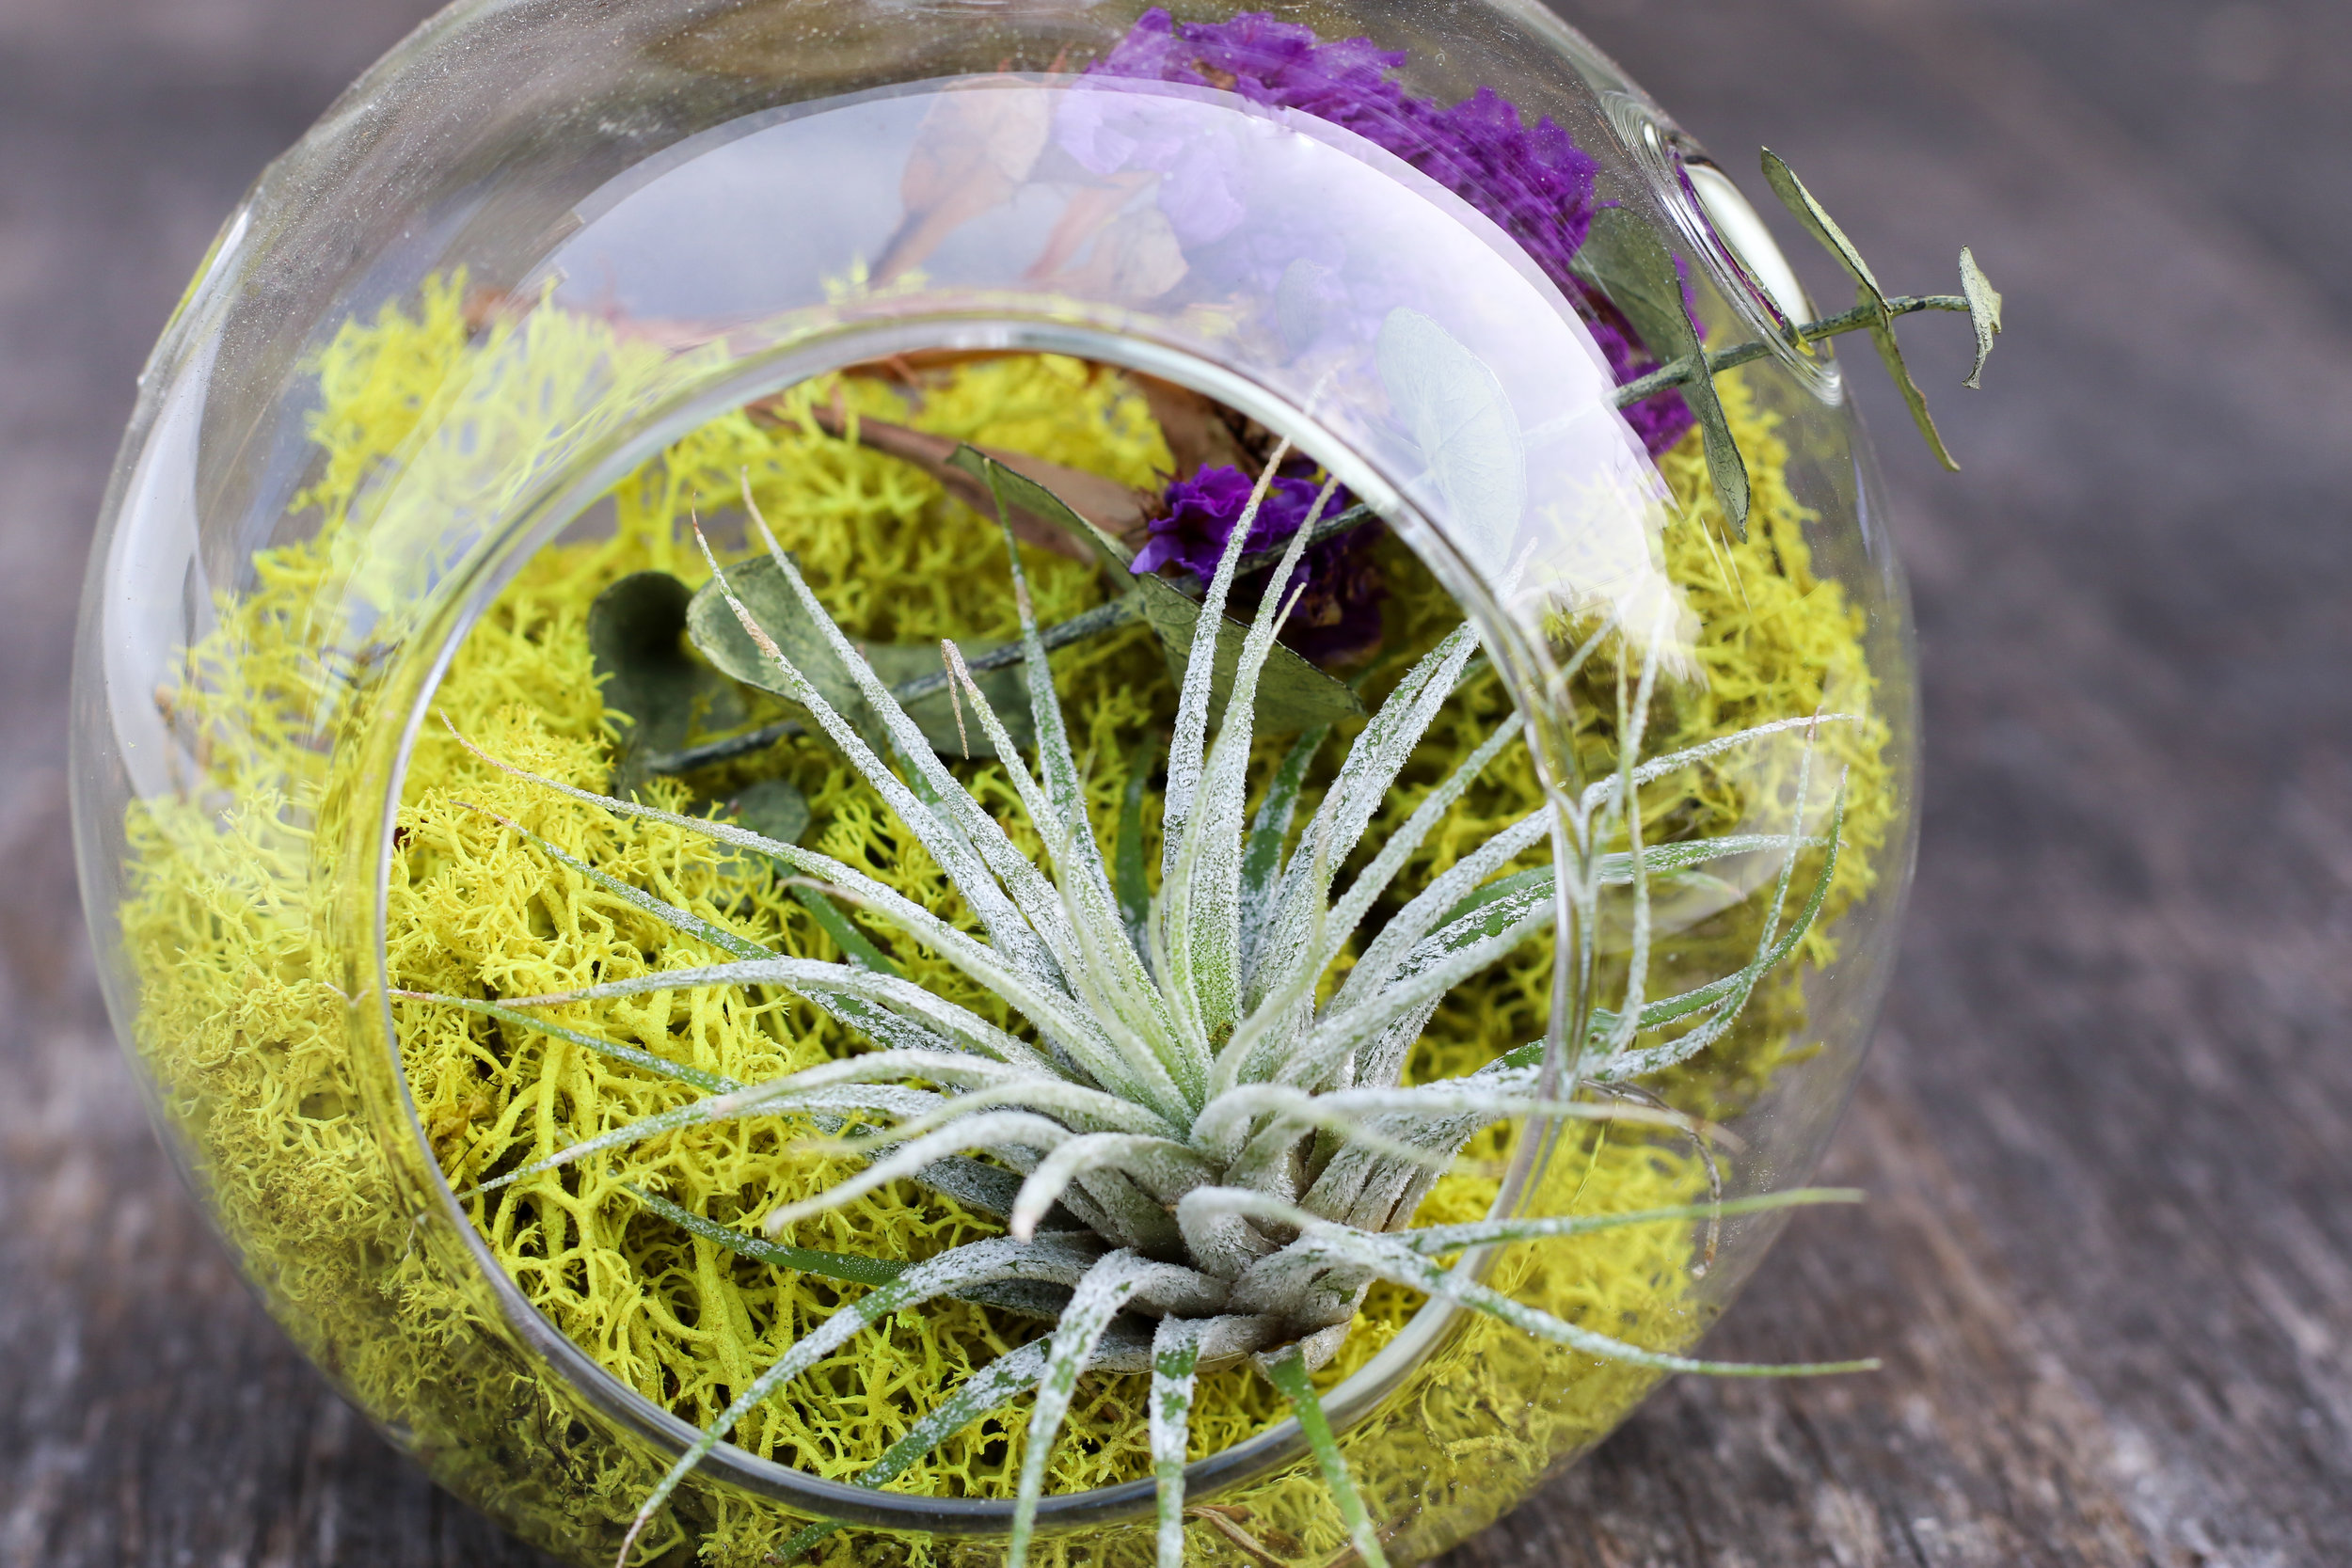 Alt text: a glass ball with an opening in the front holds a green, spiked succulent nestled amidst yellow-green moss and a purple flower